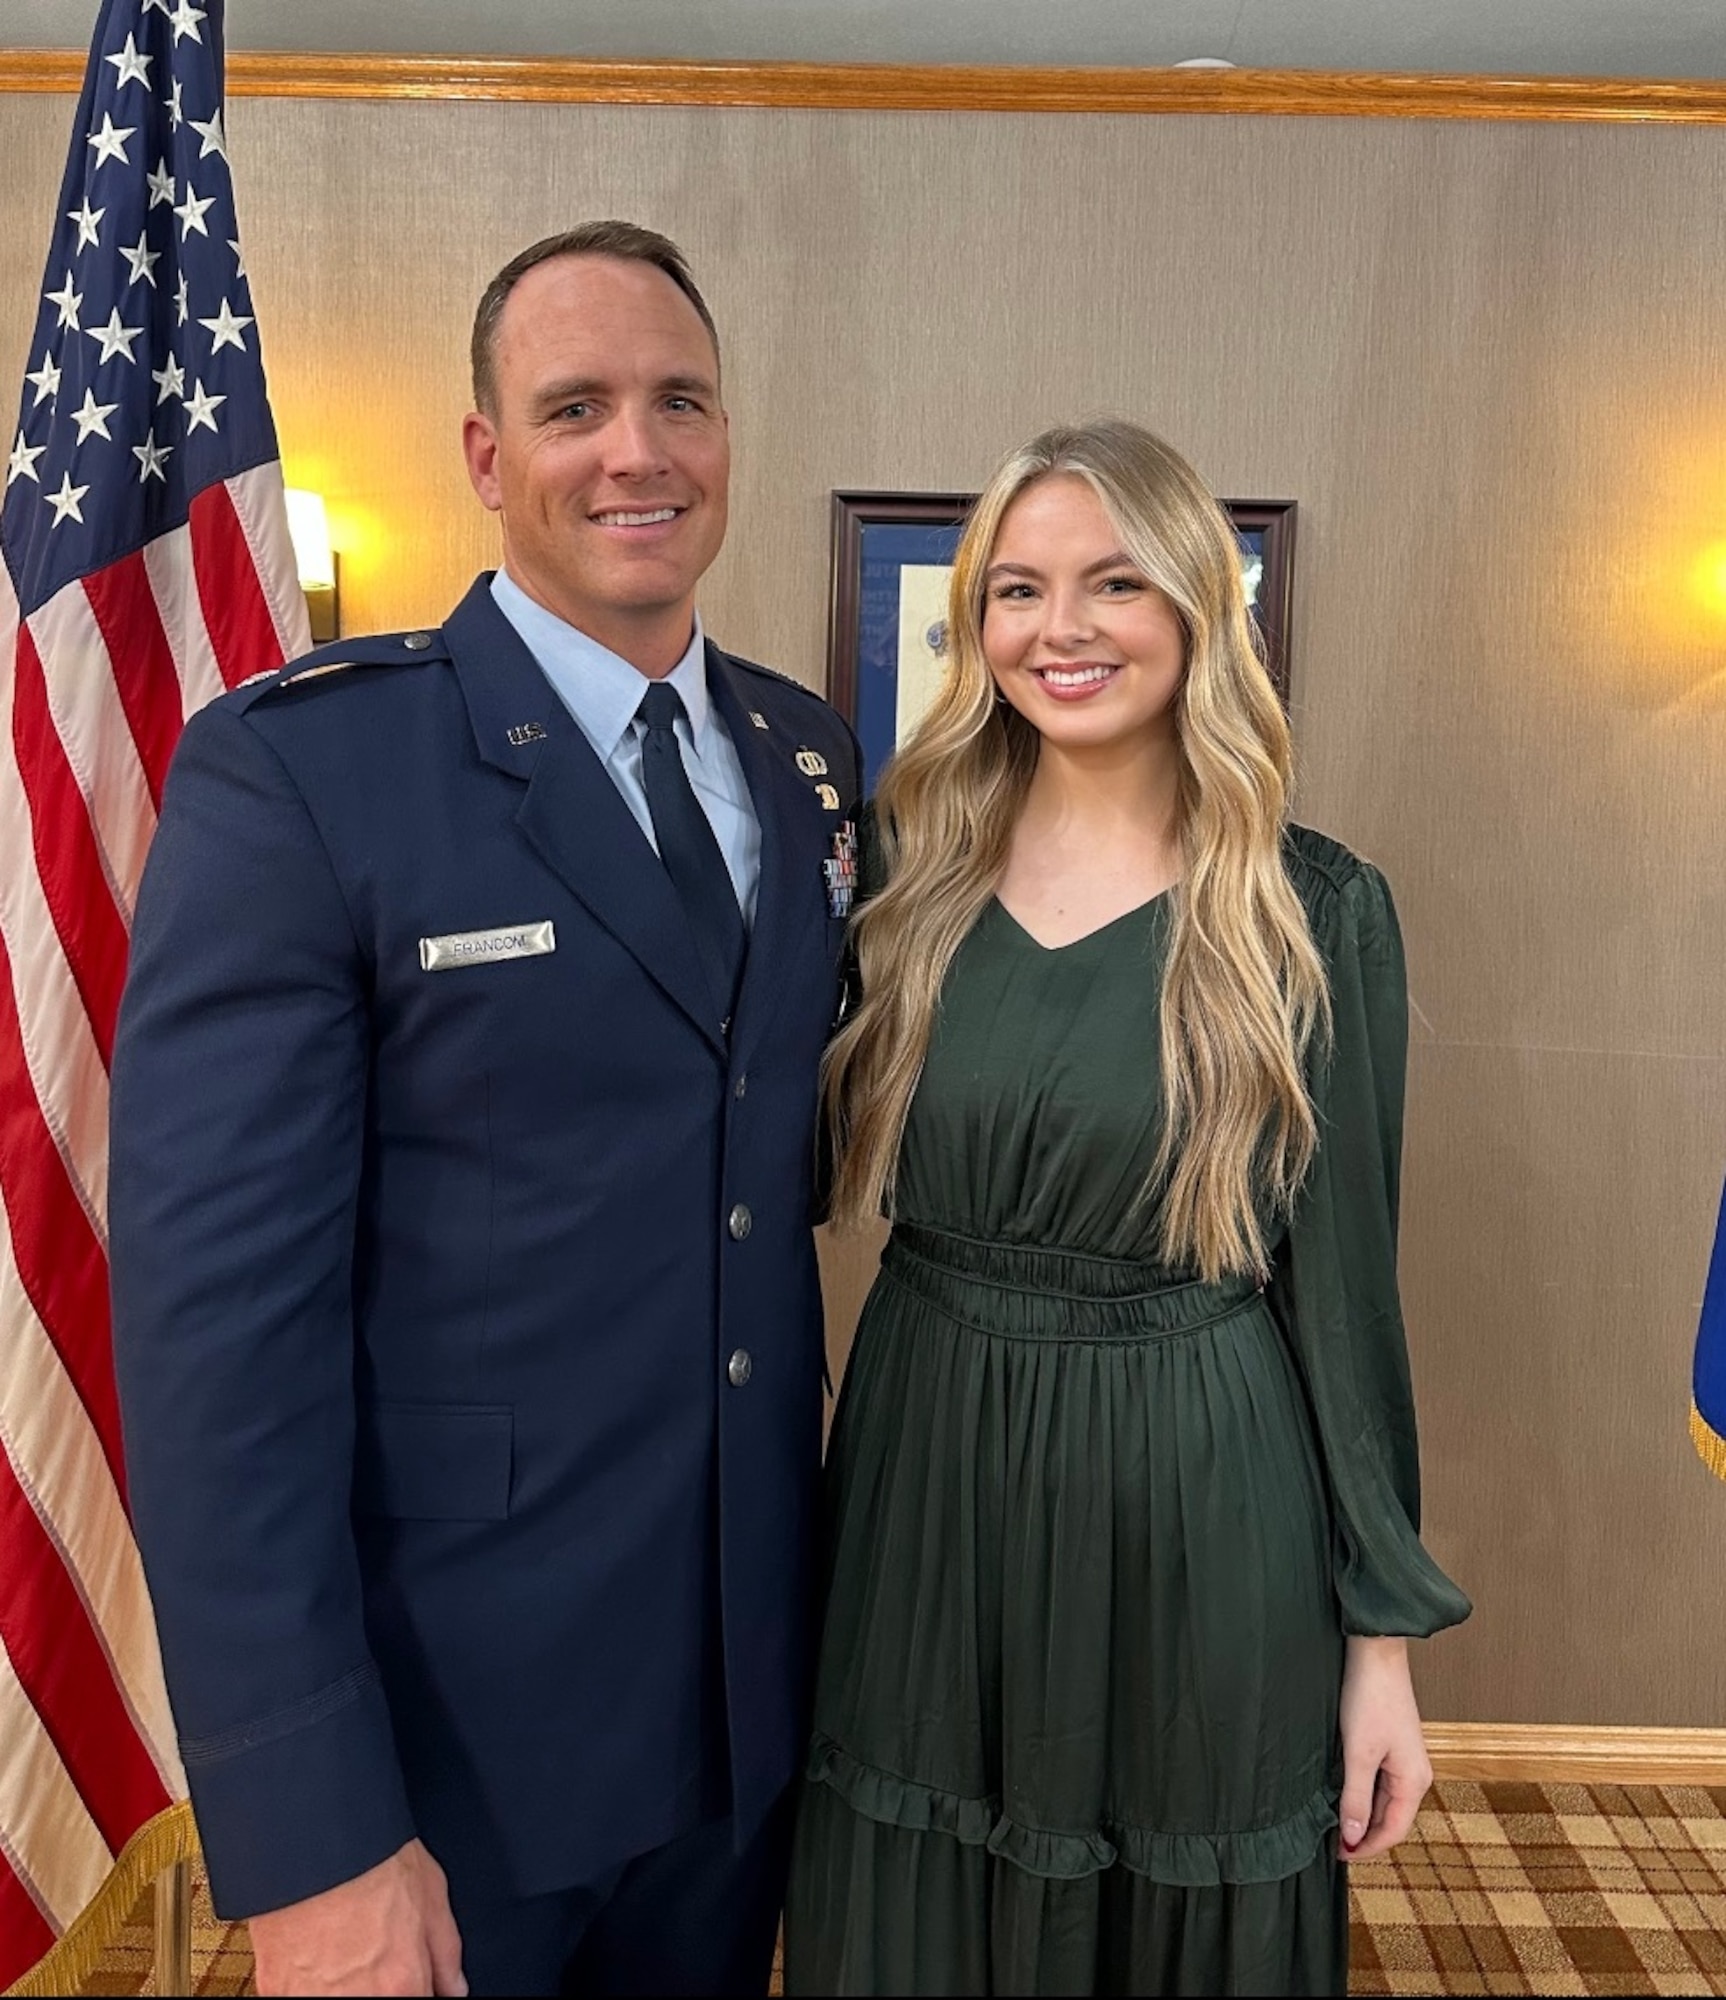 Utah's Elleigh Francom impressed all three American Idol judges, advancing to the Hollywood round of the 2024 season. She is the daughter of the 75th Operations Squadron’s Lt. Col. Matthew Francom.